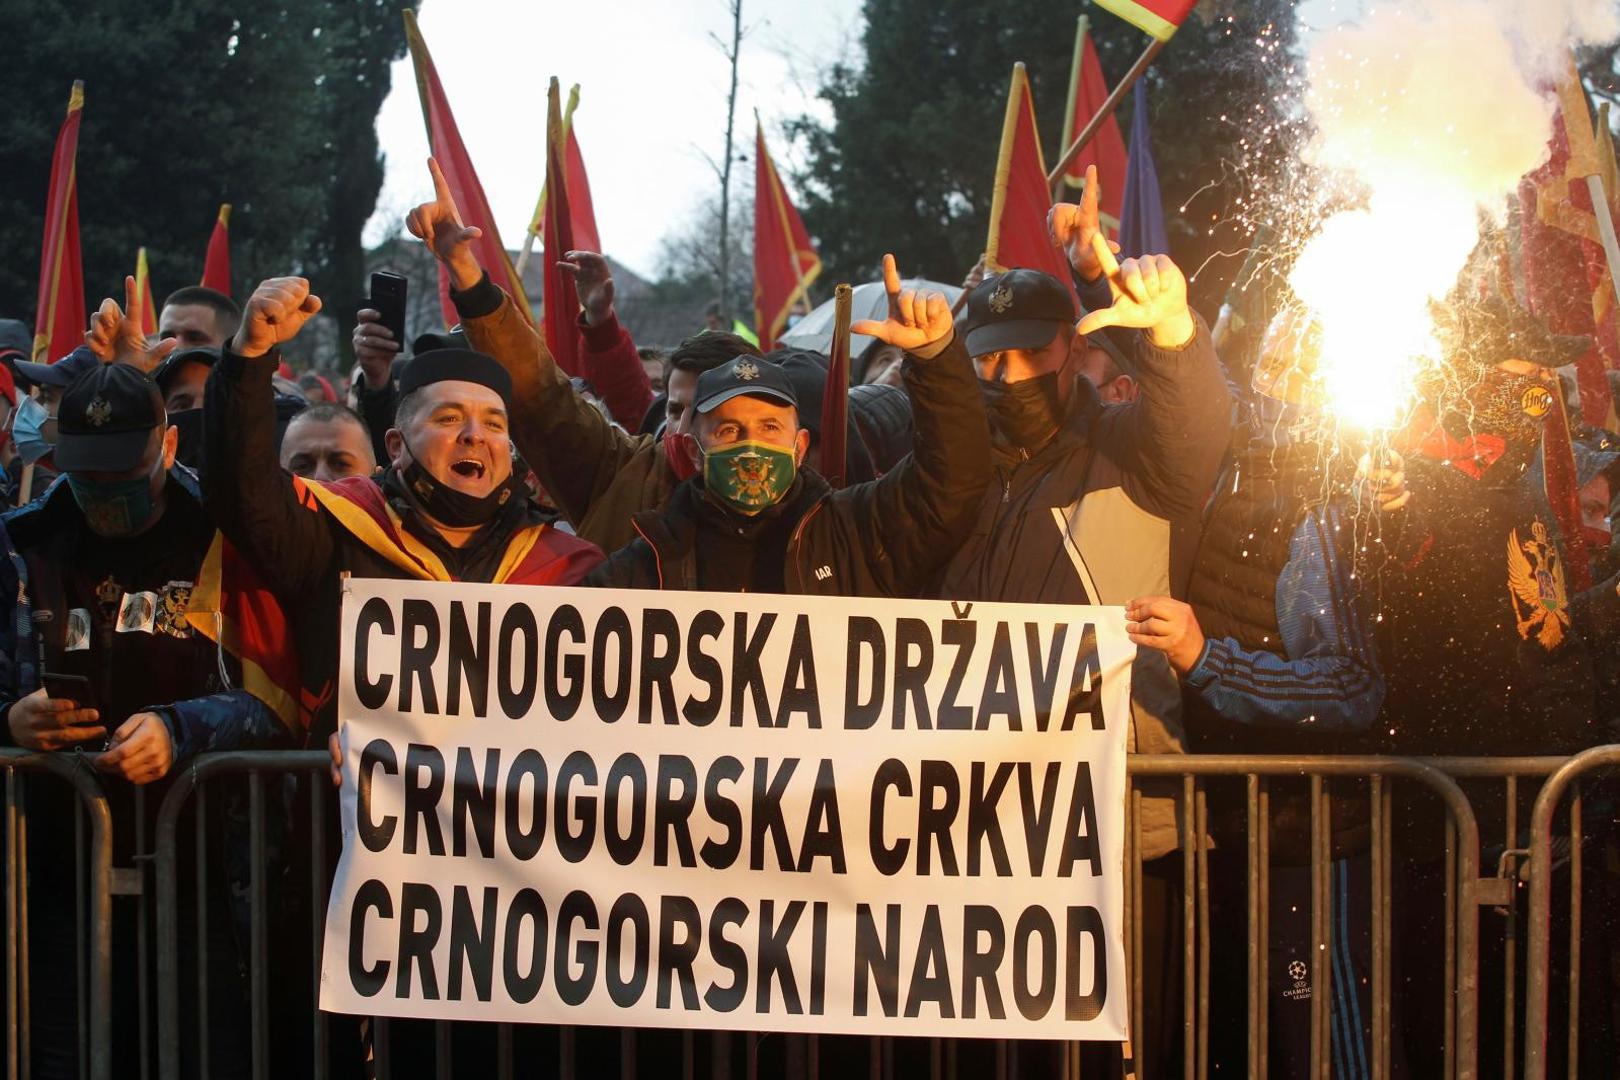 Protestors shout slogans during a rally ahead of a vote for the amendments of Law on Religious Freedoms, in Podgorica Protestors shout slogans during a rally ahead of a vote for the amendments of Law on Religious Freedoms, in front of parliament in Podgorica, Montenegro, December 28, 2020. Banner reads: "Montenegrin state, Montenegrin church, Montenegrin people". REUTERS/Stevo Vasiljevic STEVO VASILJEVIC